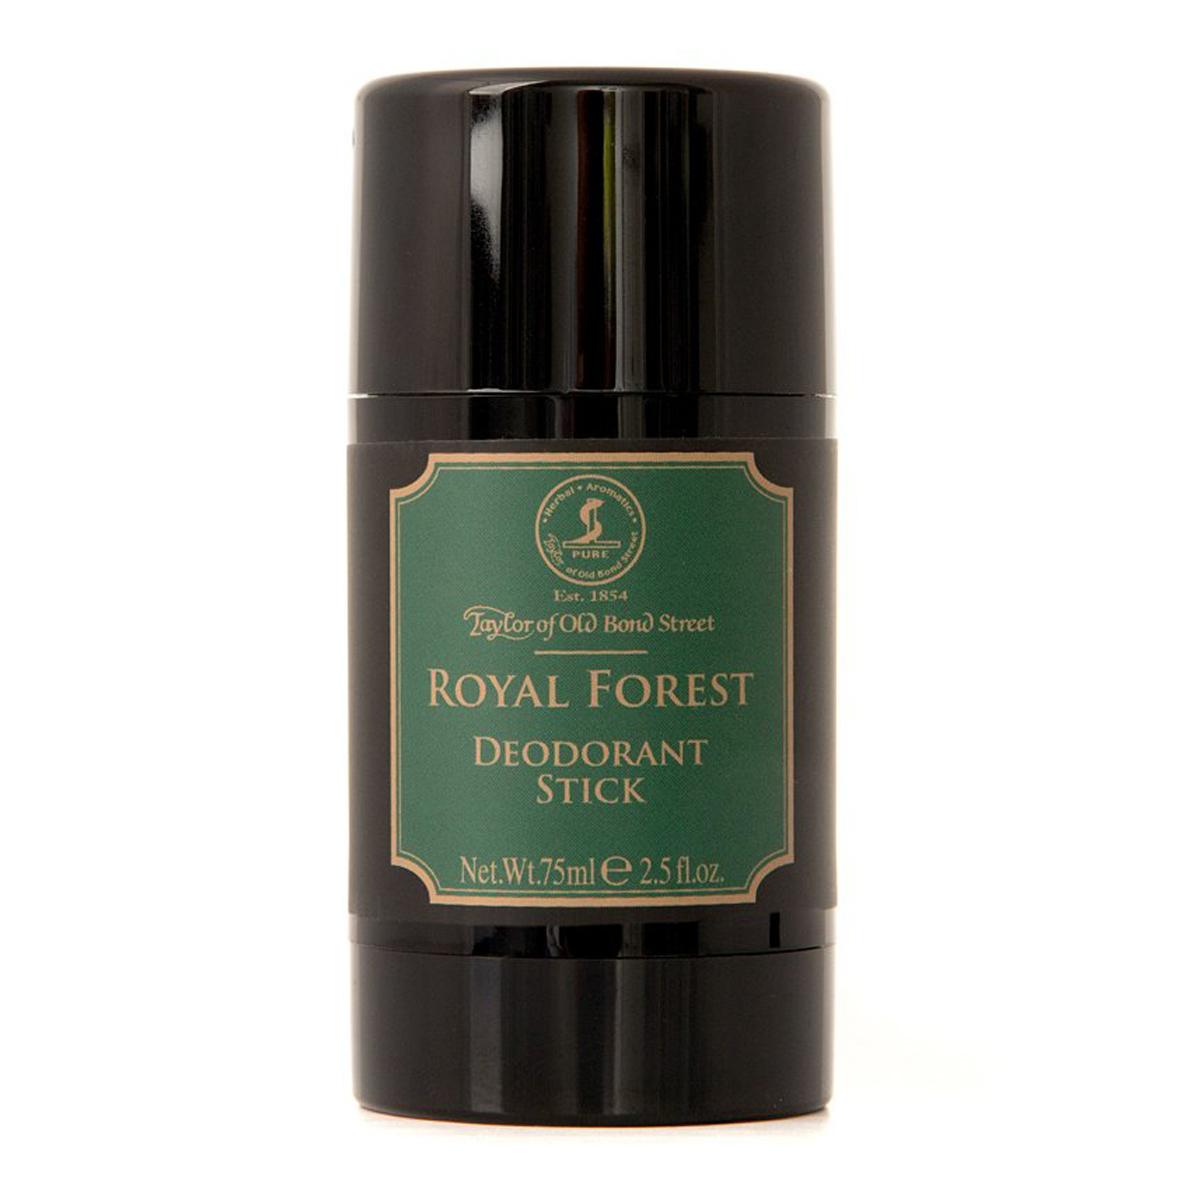 Primary image of Royal Forest Deodorant Stick  